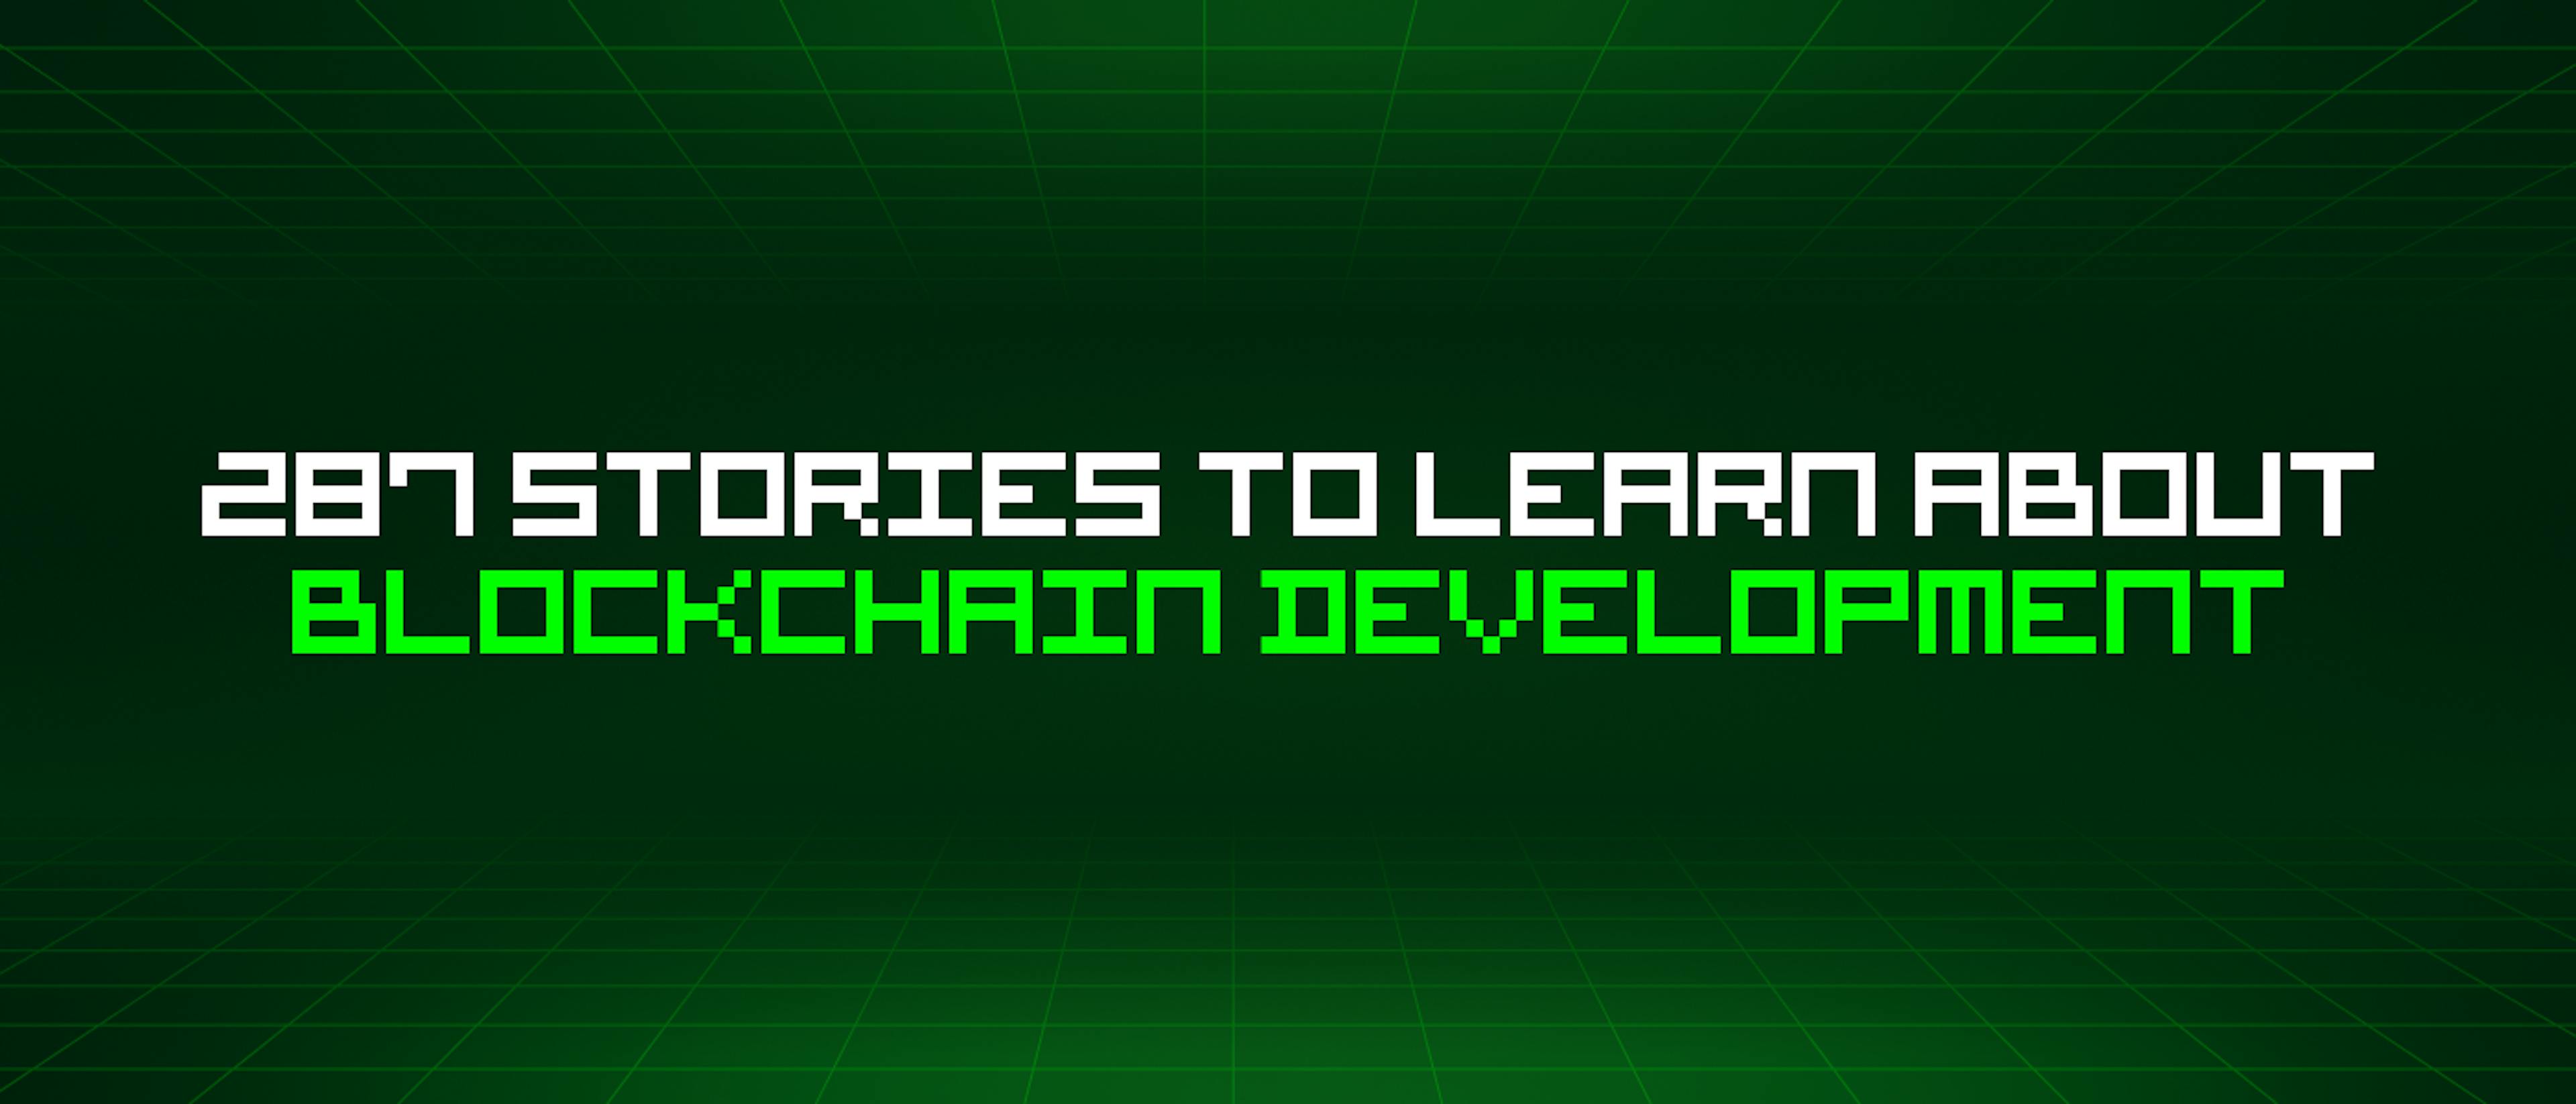 featured image - 287 Stories To Learn About Blockchain Development